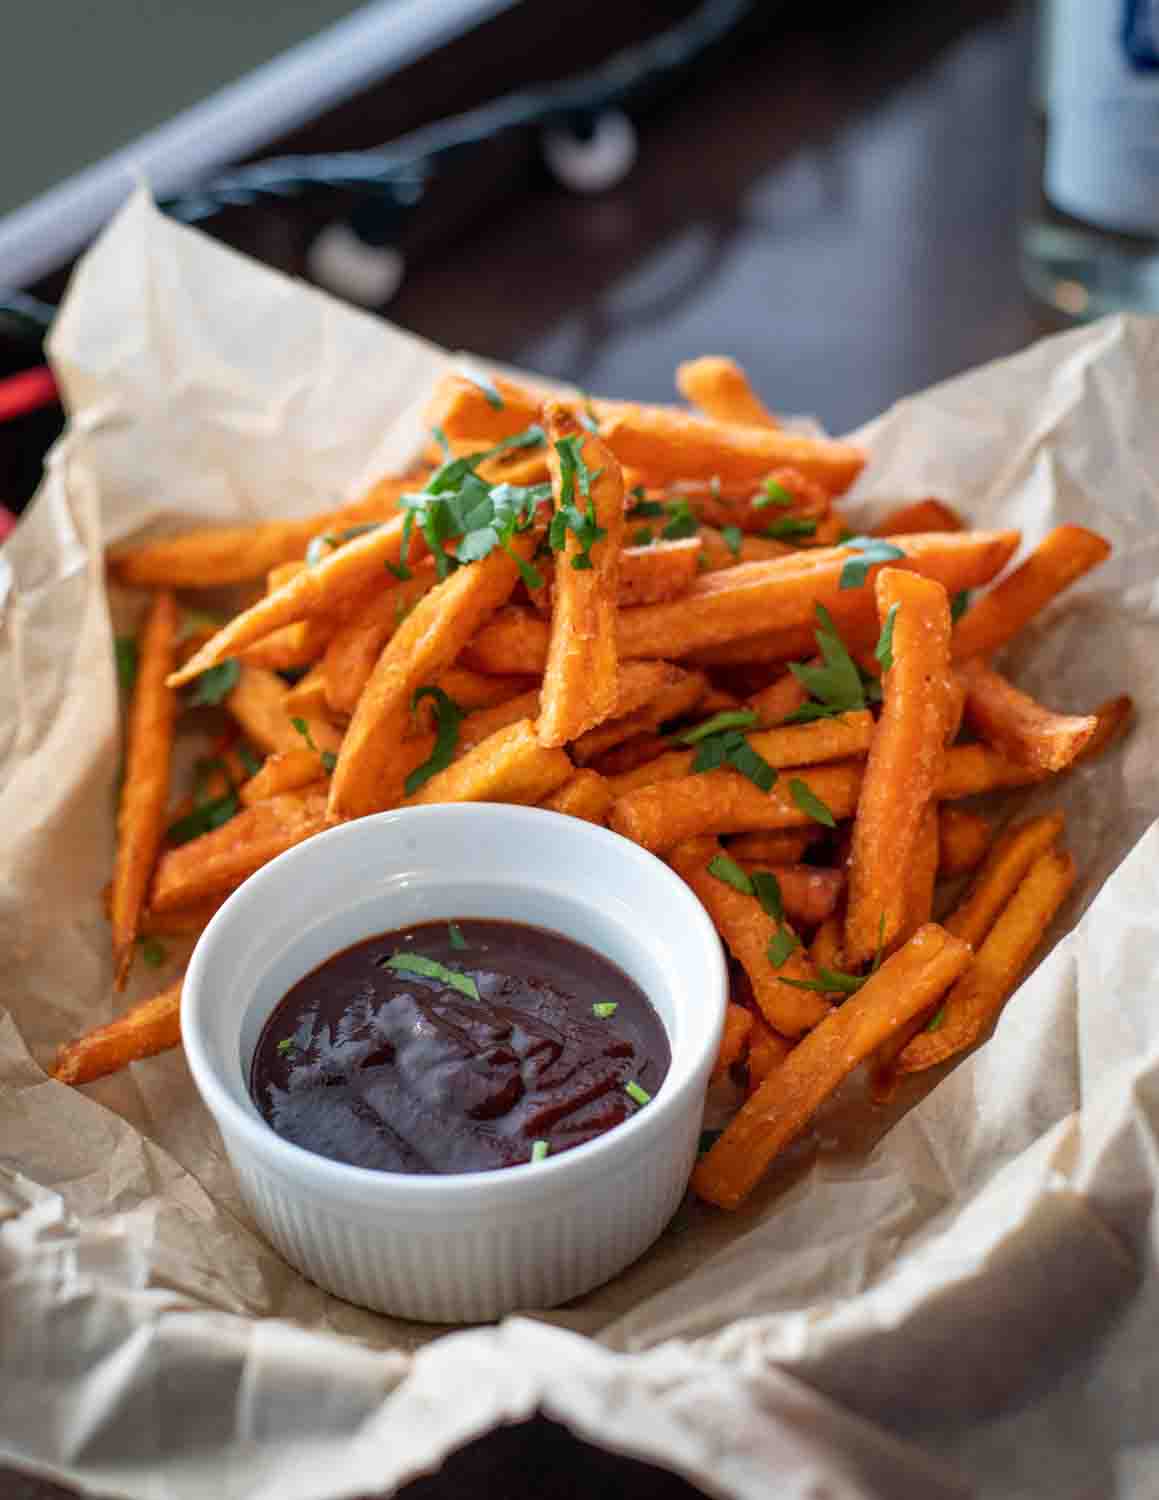 Sweet potato fries with a sauce on the side